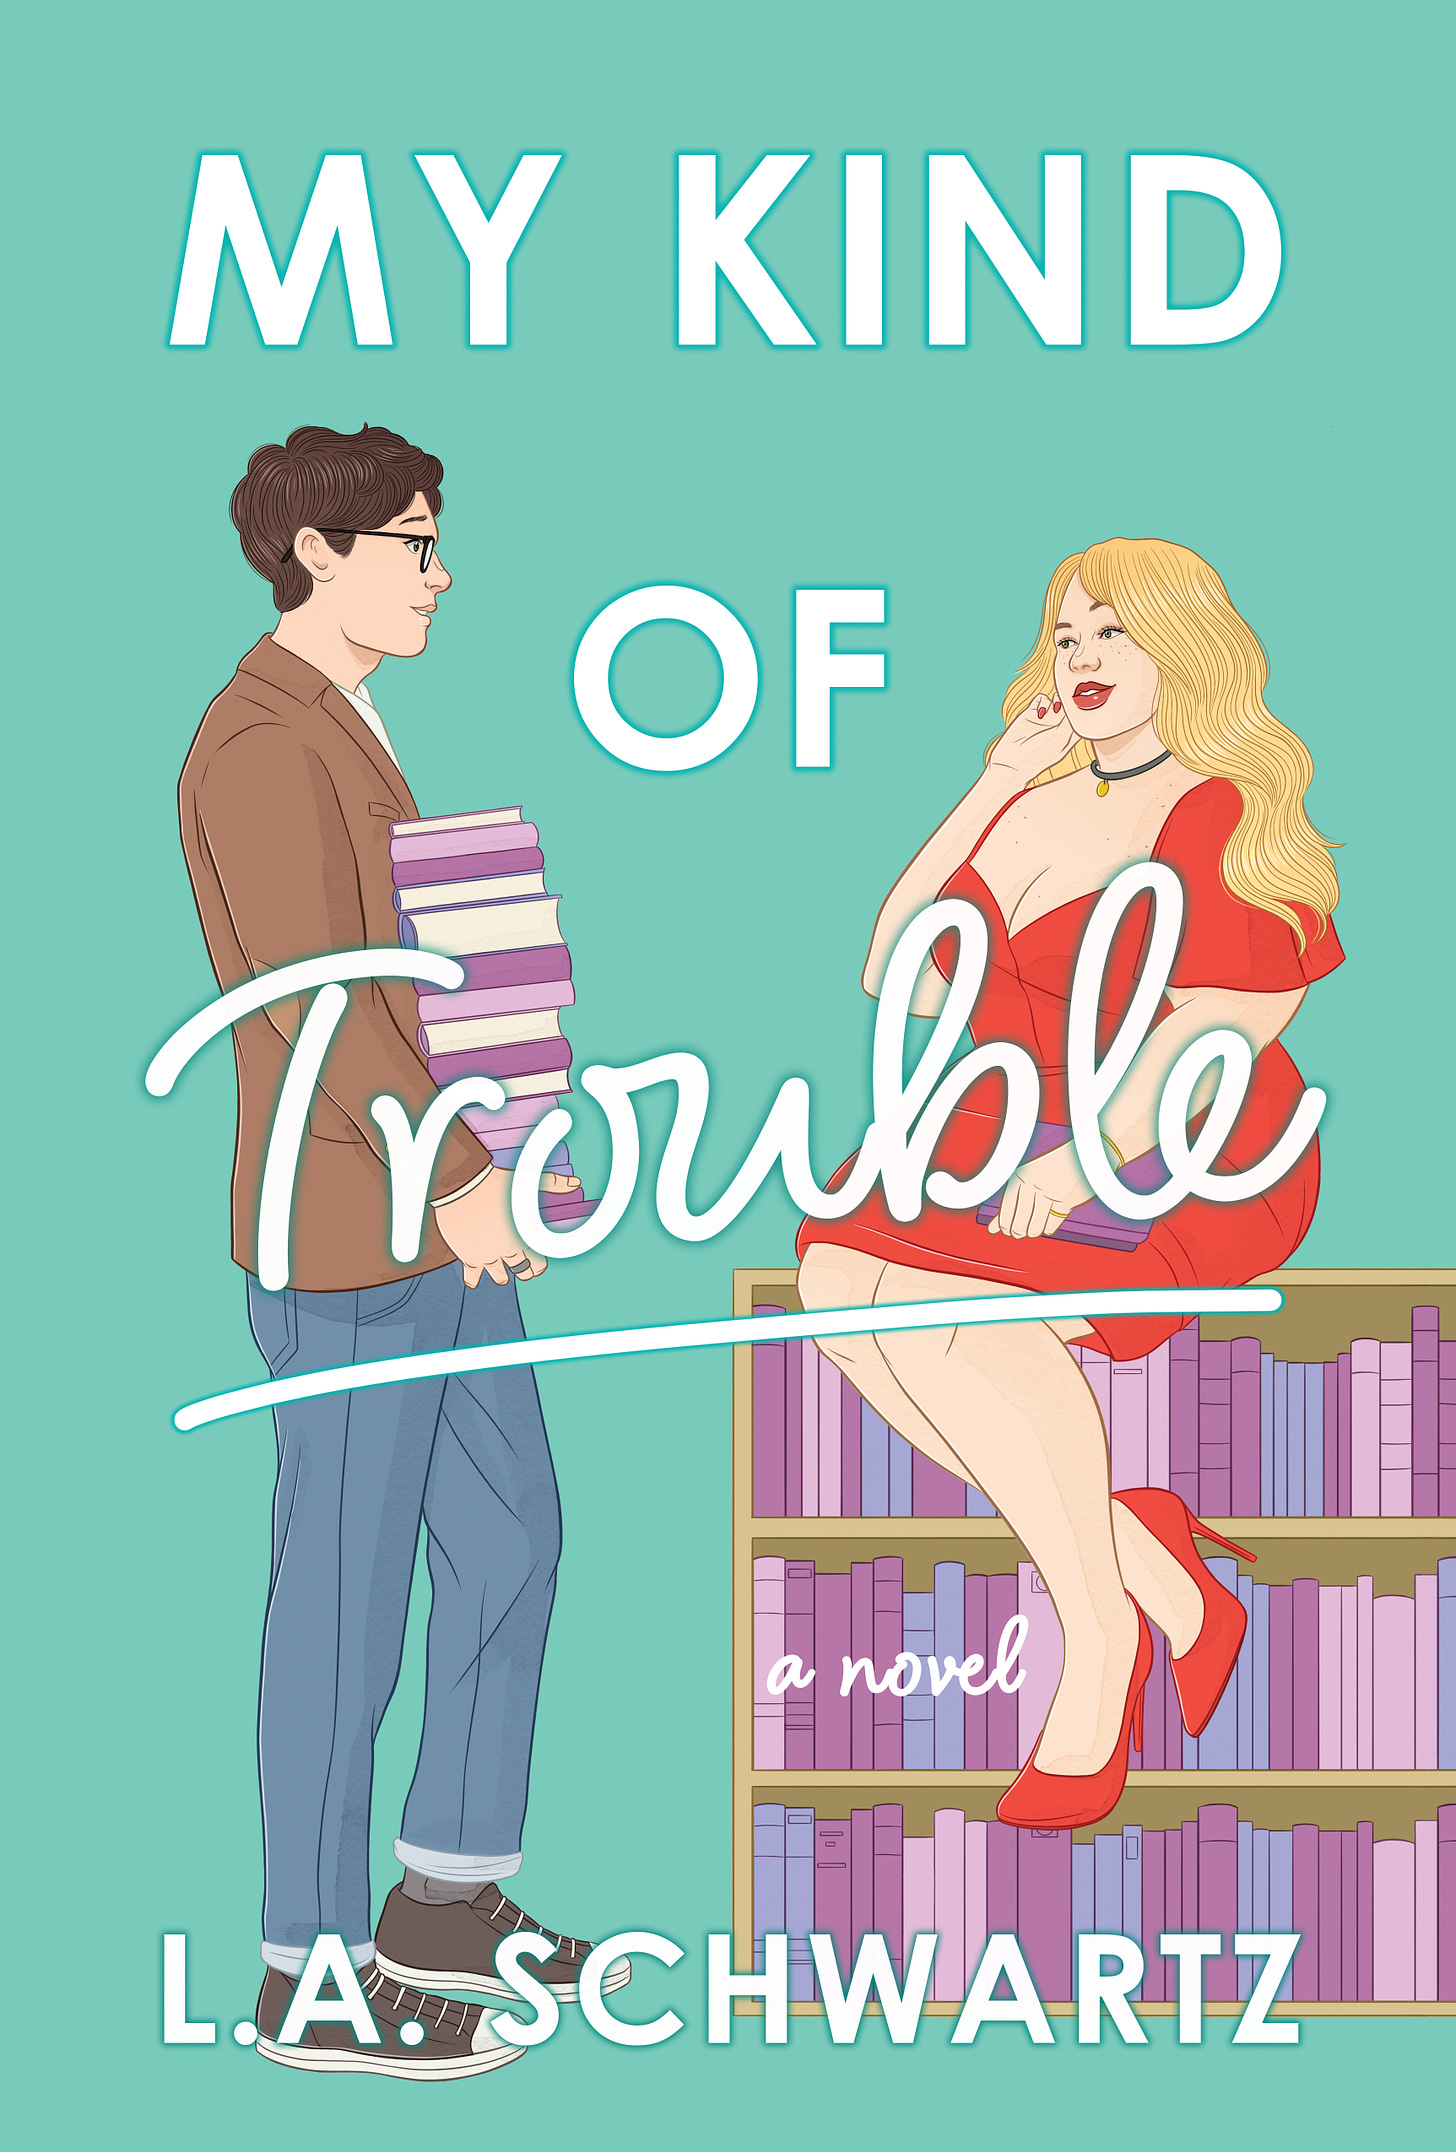 My Kind of Trouble book cover: teal background with a bold white san serif font reading MY KIND OF across the top and between two figures, TROUBLE written in large script over the two figures, and a small script font reading “a novel” tucked into a bookshelf near the bottom. The two figures are a tall dark-haired man in glasses, brown tweed jacket, jeans, and sneakers, carrying an overly tall stack of books and smiling at a glamorous fat blonde woman in a low-cut red dress, choker, and red lipstick sitting on a low bookcase, holding a book in her lap, and smiling back slyly. The books are in pinks and purples. The author L. A. Schwartz is written at the bottom.